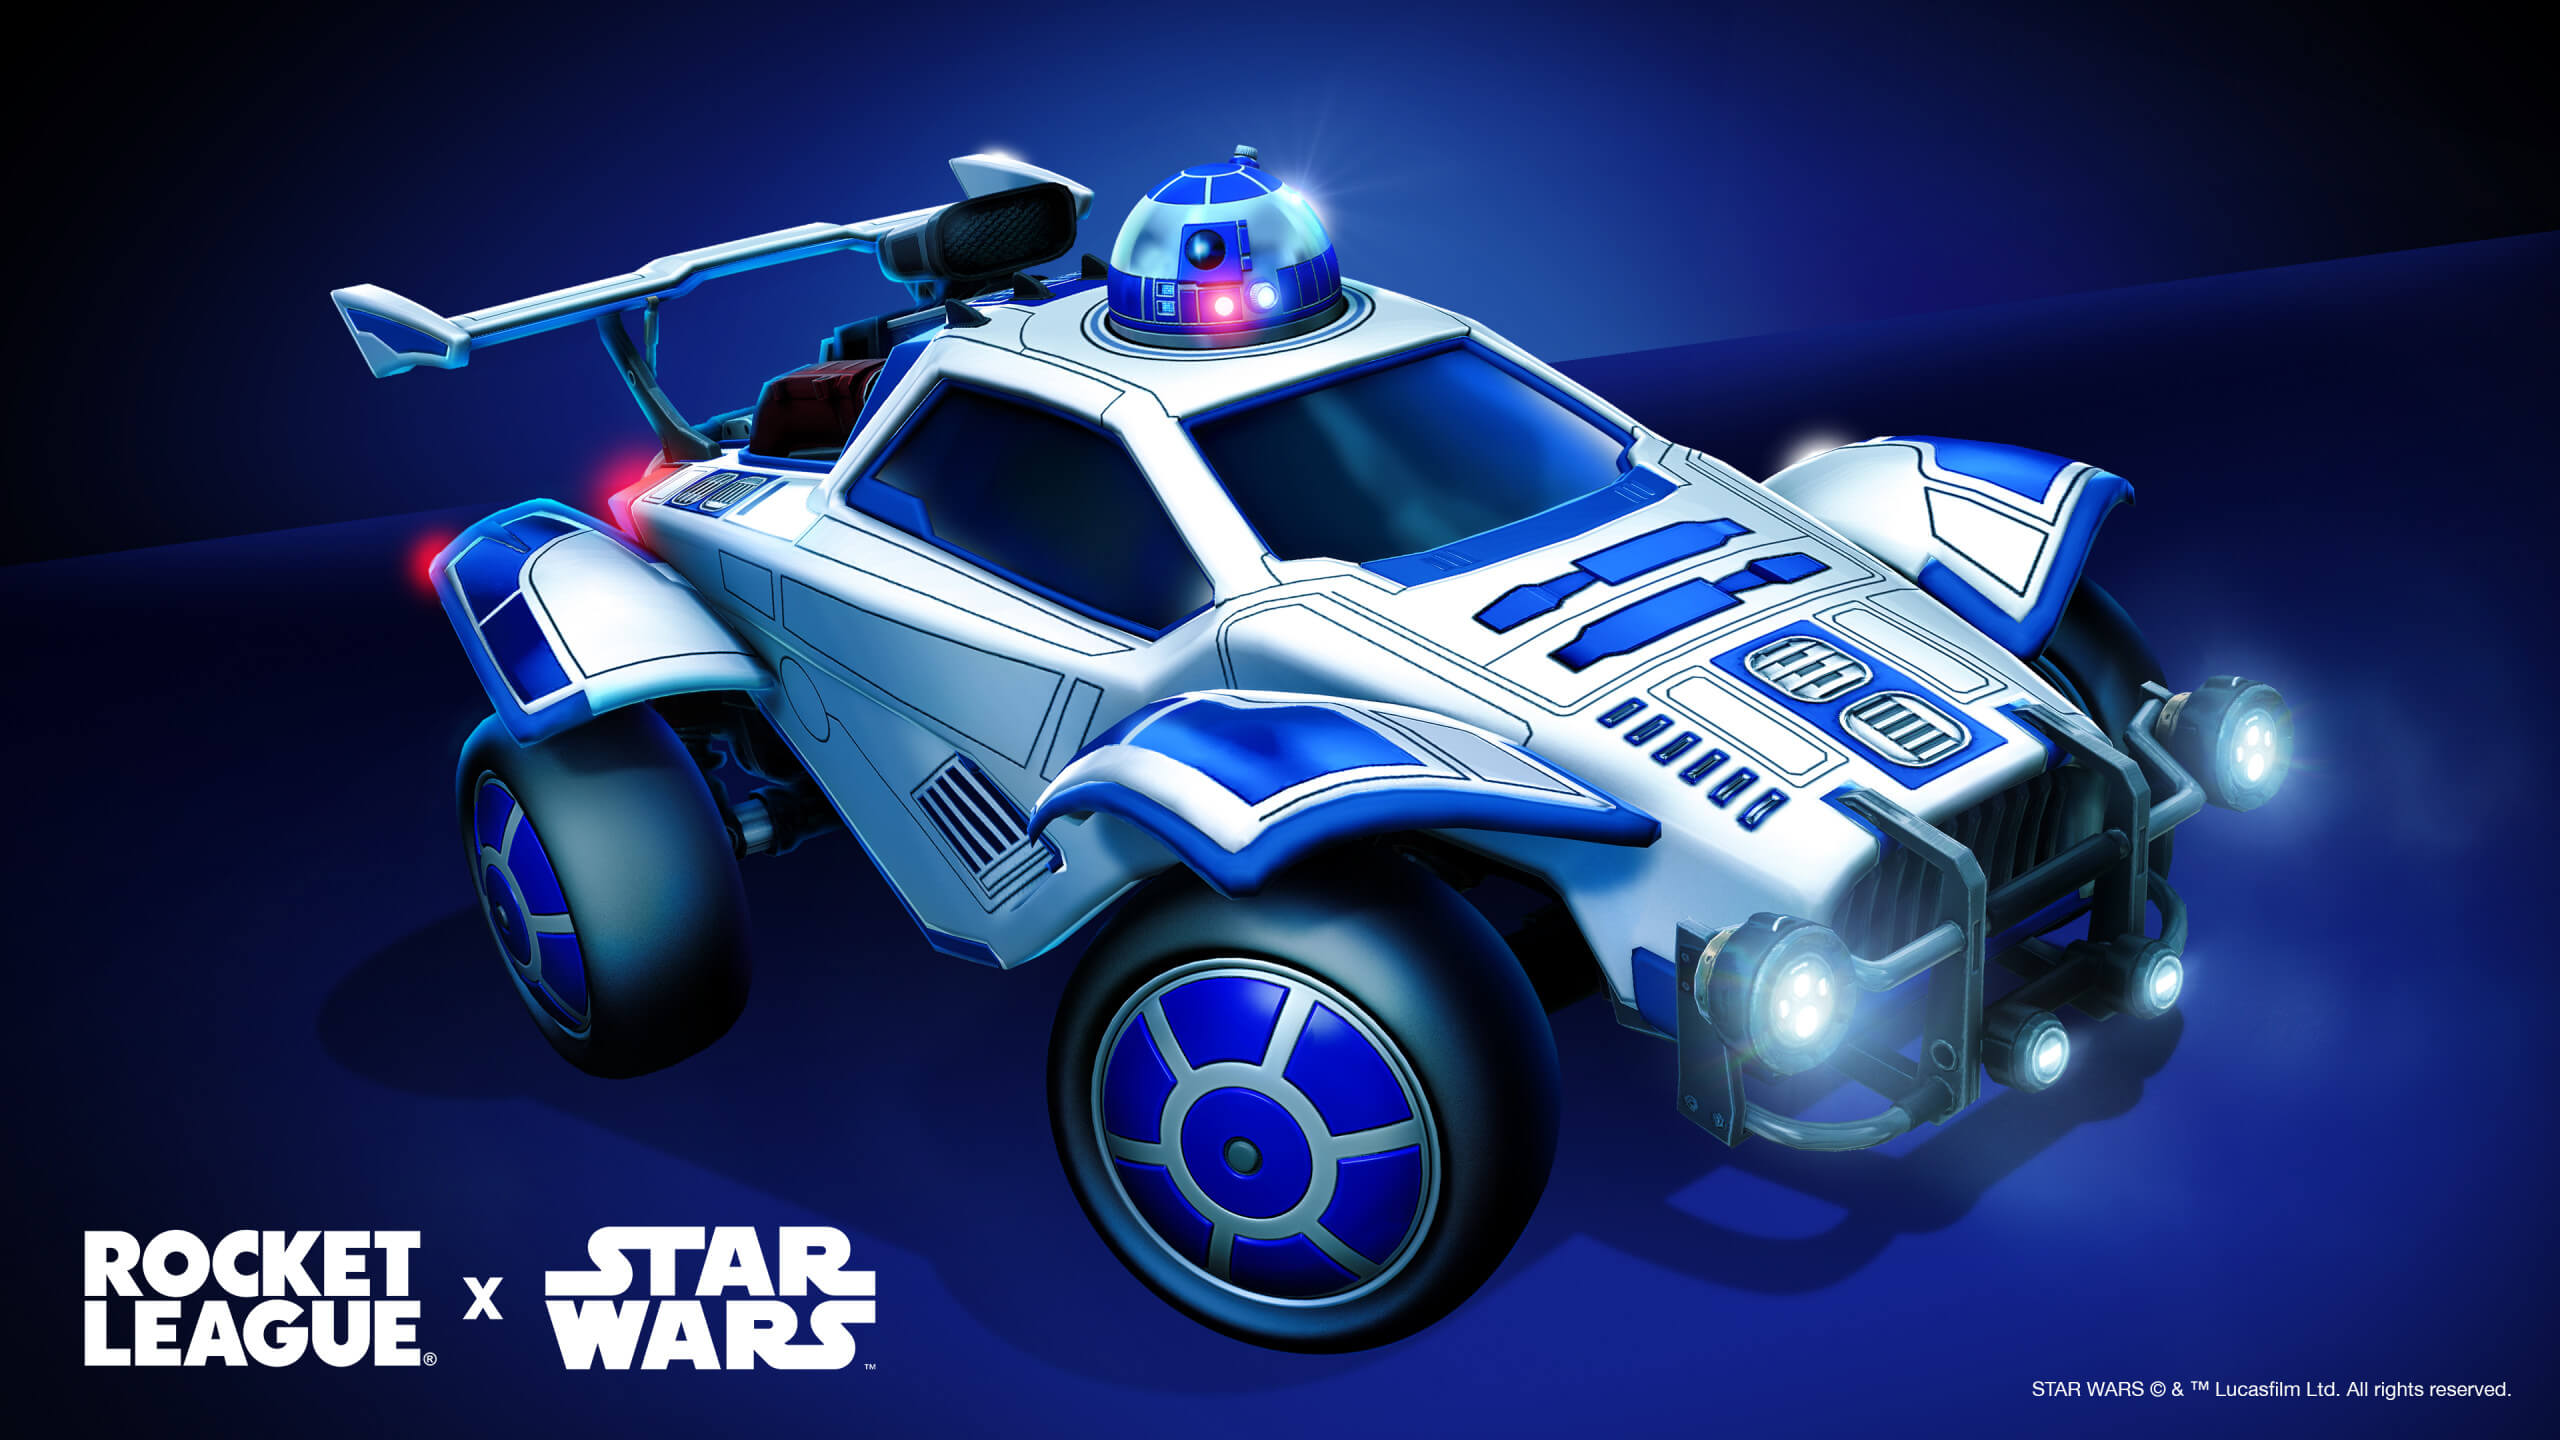 The Octane car in rocket league with its r2 d2 skin